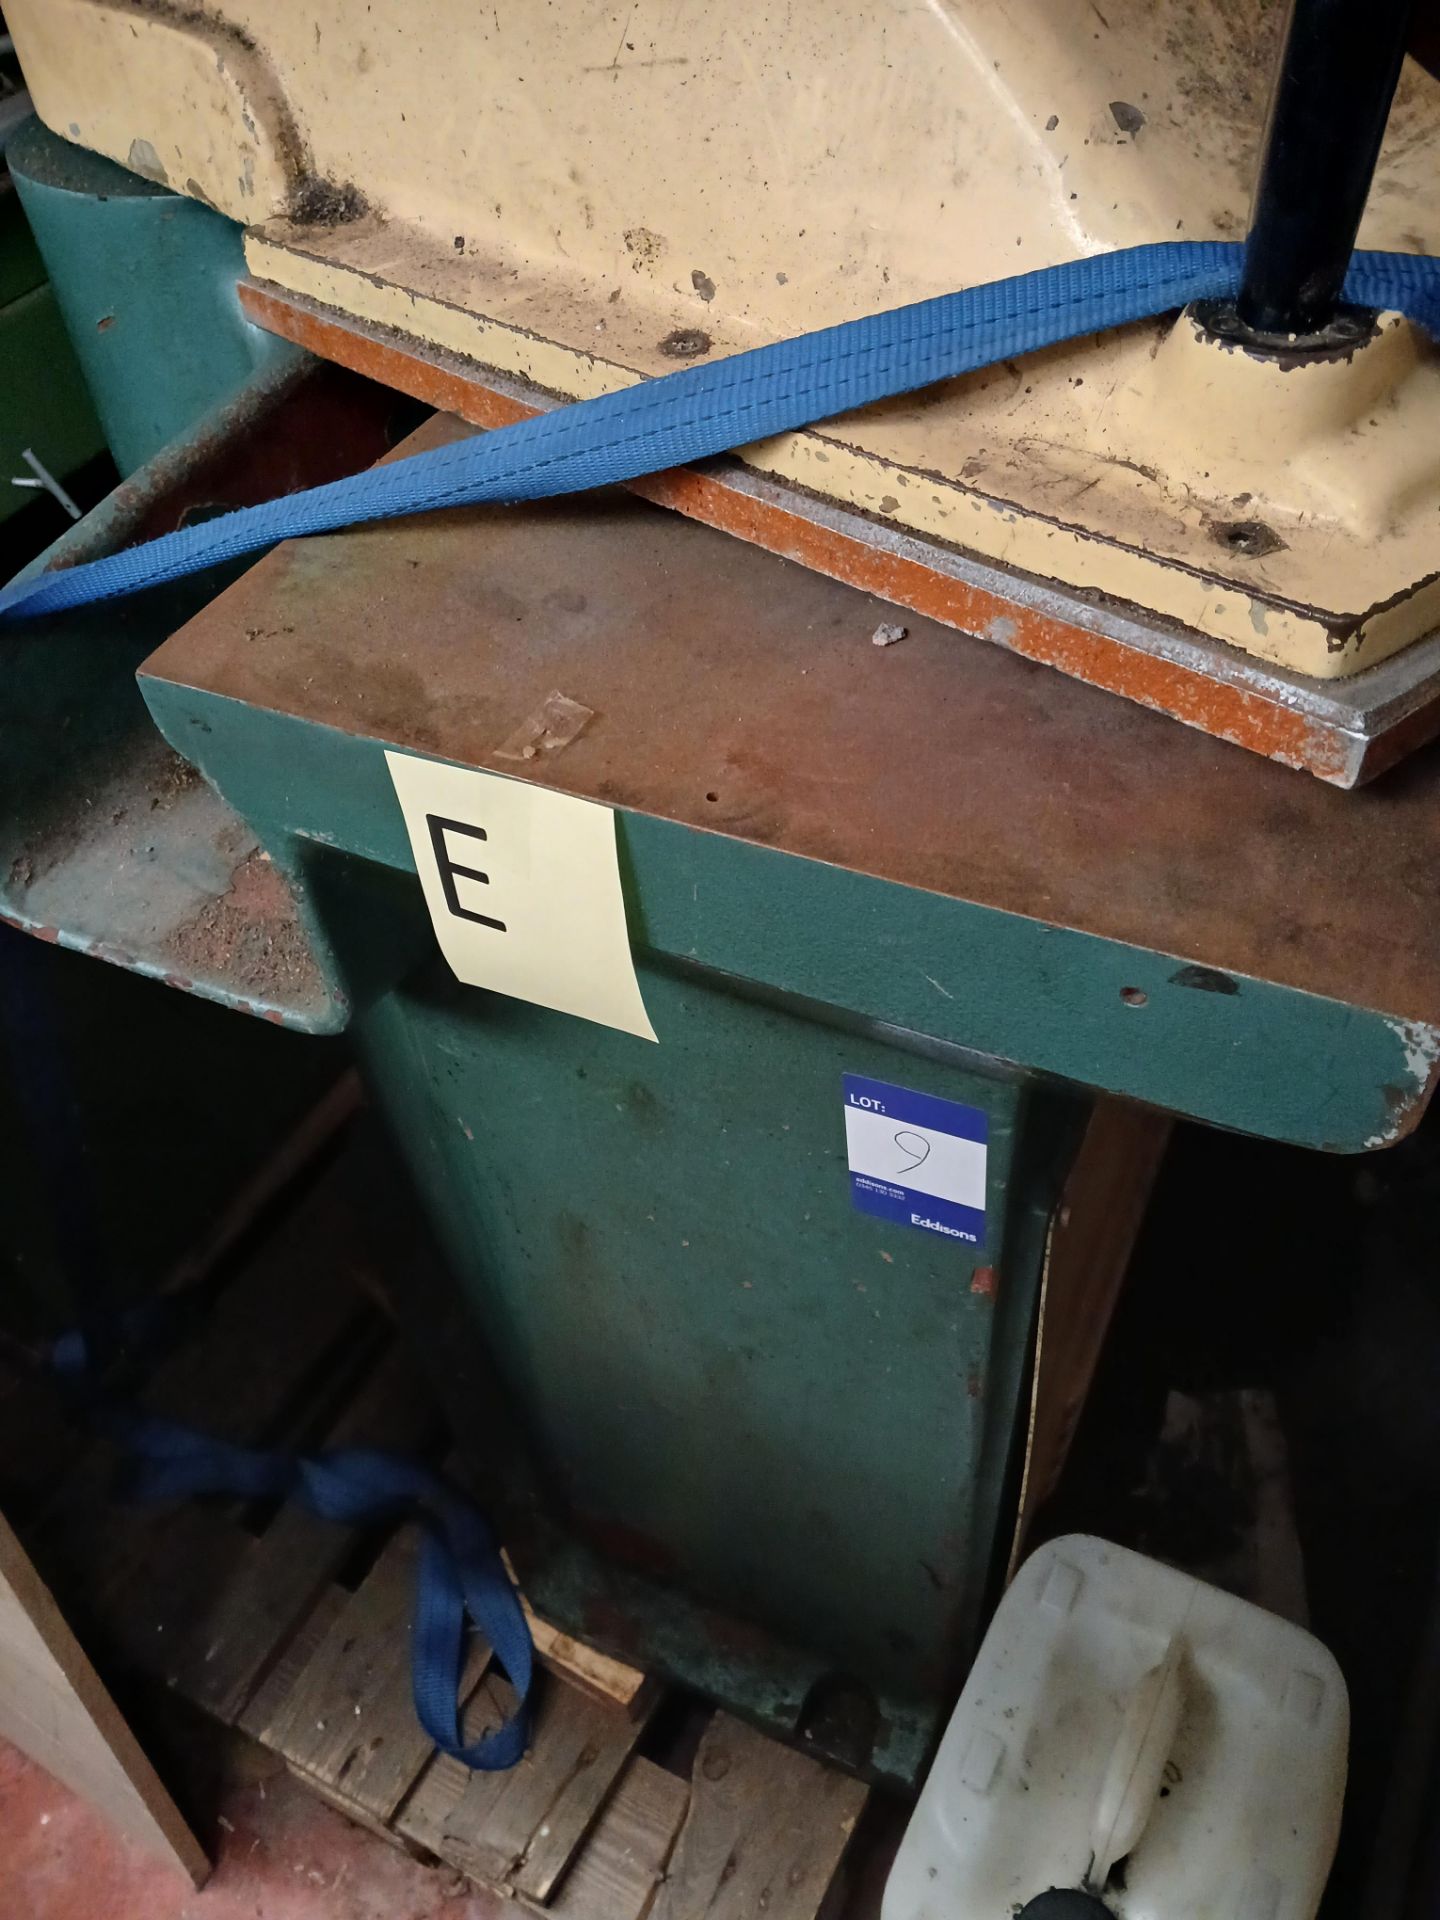 Atom G222 rotating head plate press – spares or repairs, overall dimensions 92cm(w) x 90(d) x - Image 3 of 4